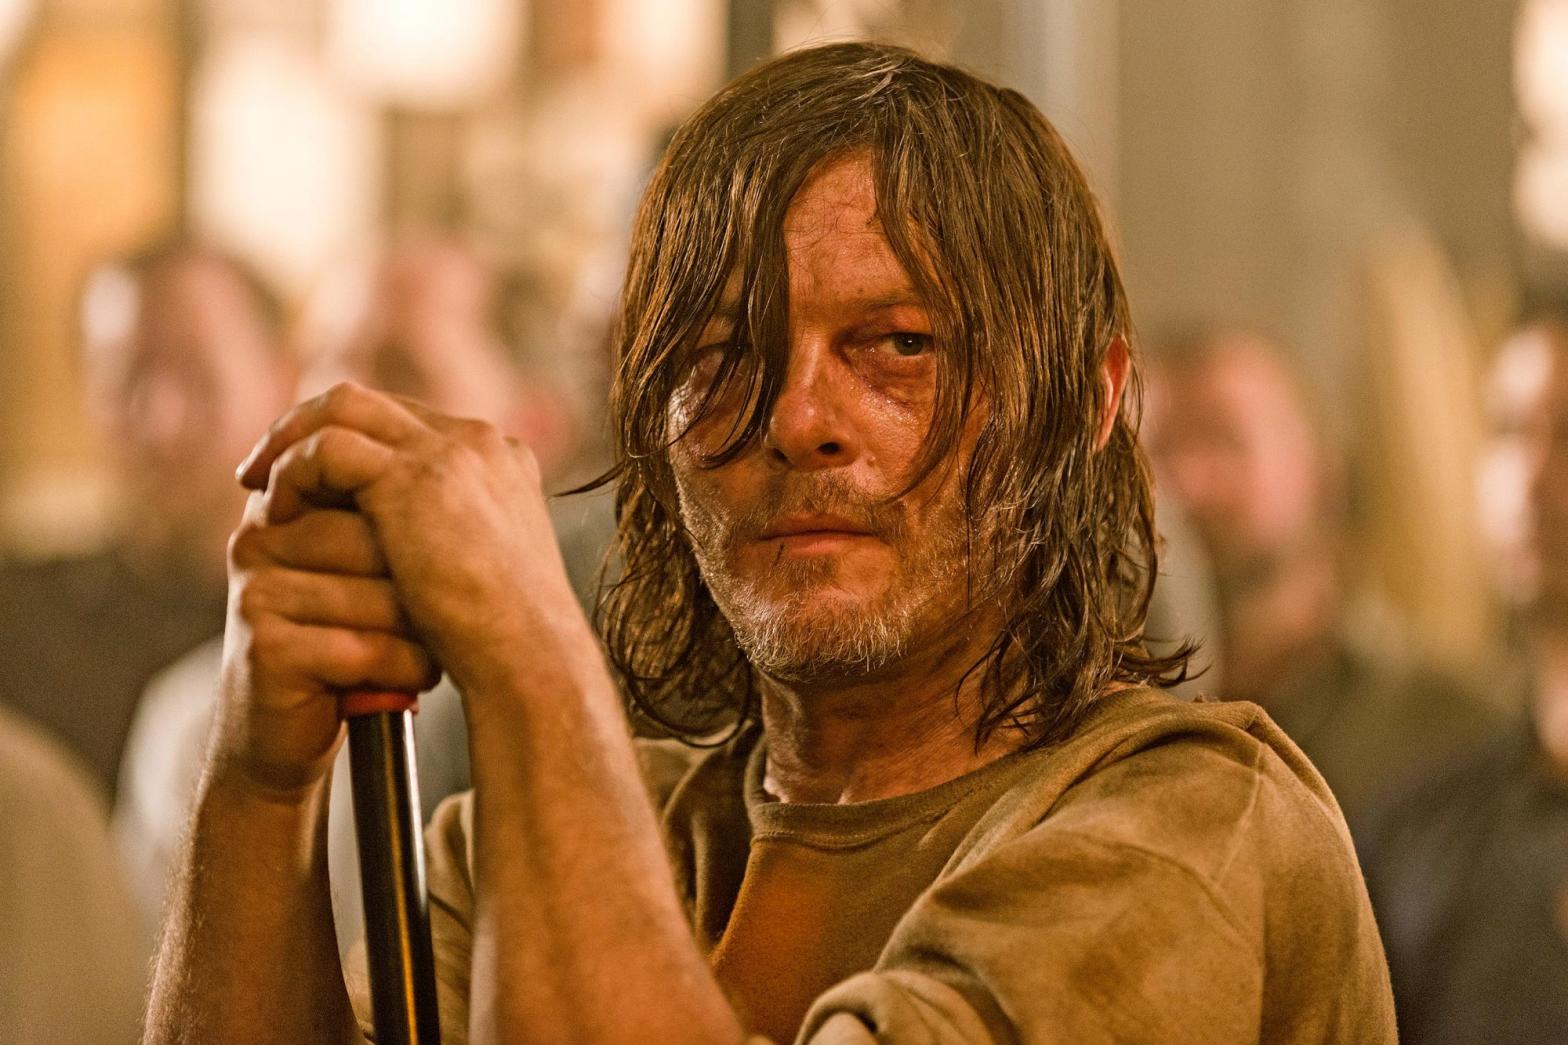 Norman Reedus as Daryl on The Walking Dead. (Photo: Gene Page/AMC)